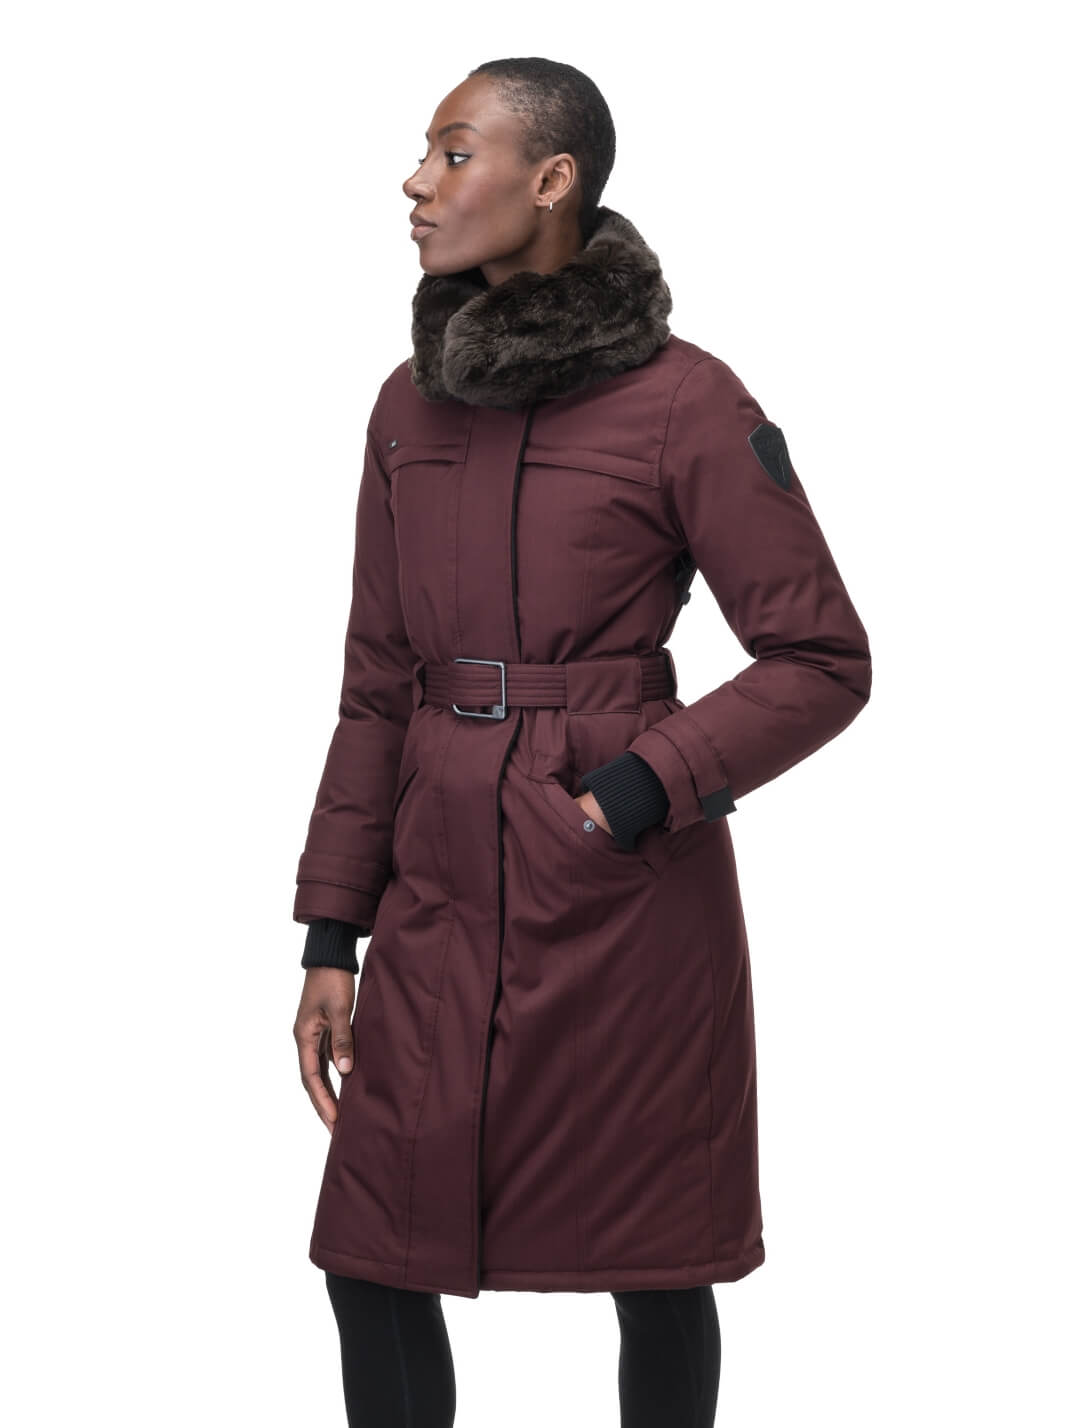 Women's knee length down filled parka with a belted waist and fully removable Coyote and Rex Rabbit fur ruffs in Merlot